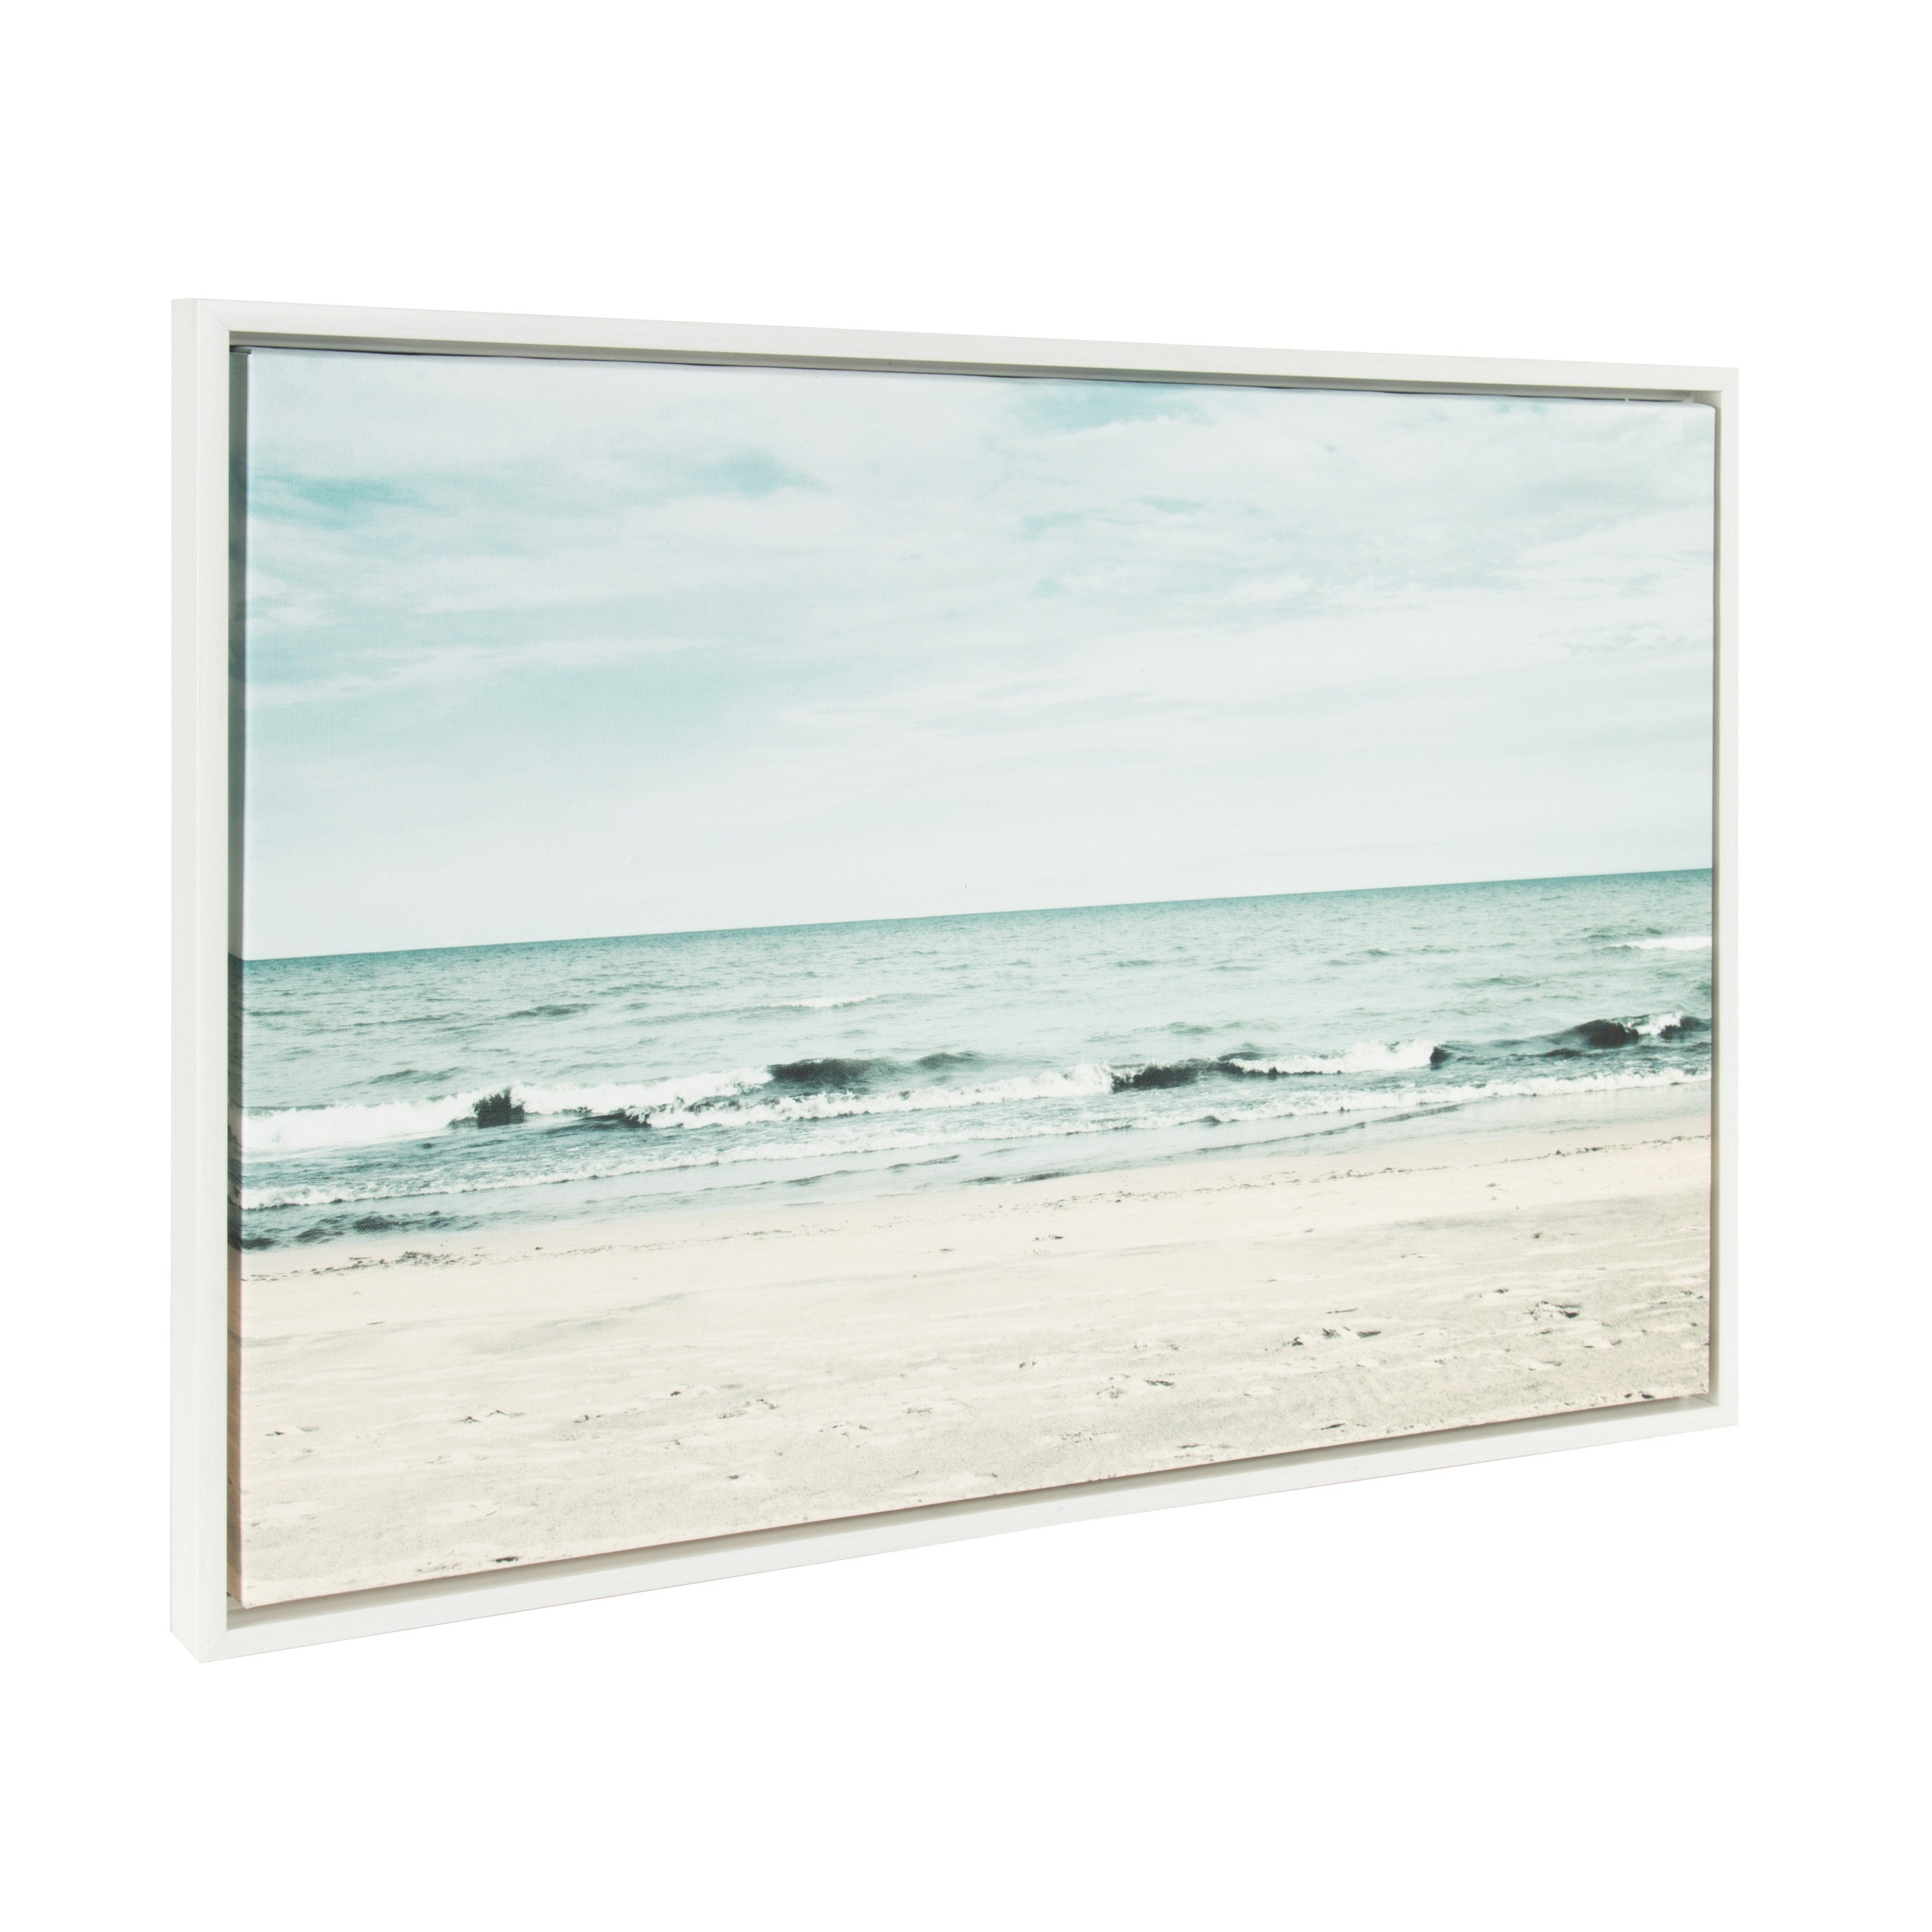 Sylvie Beach 2 Framed Canvas by Emiko and Mark Franzen of F2Images